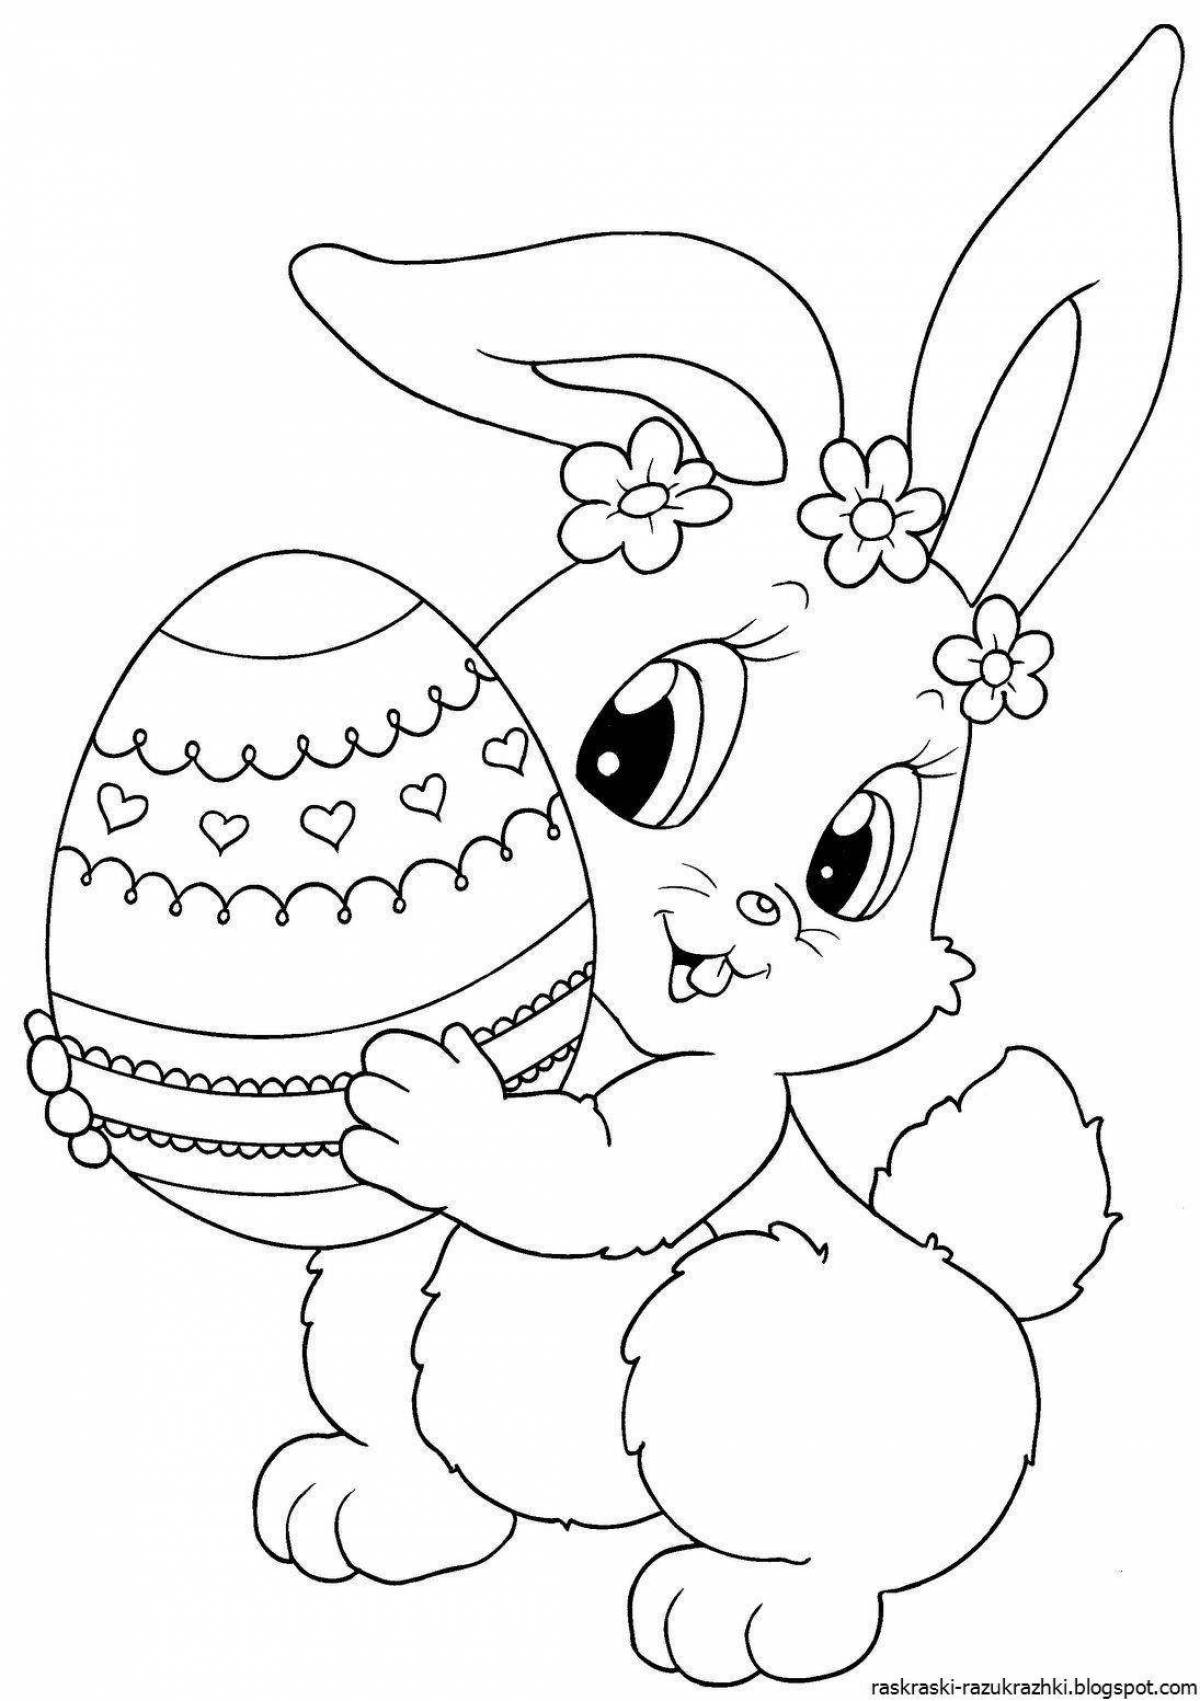 Fluffy coloring rabbit in a dress